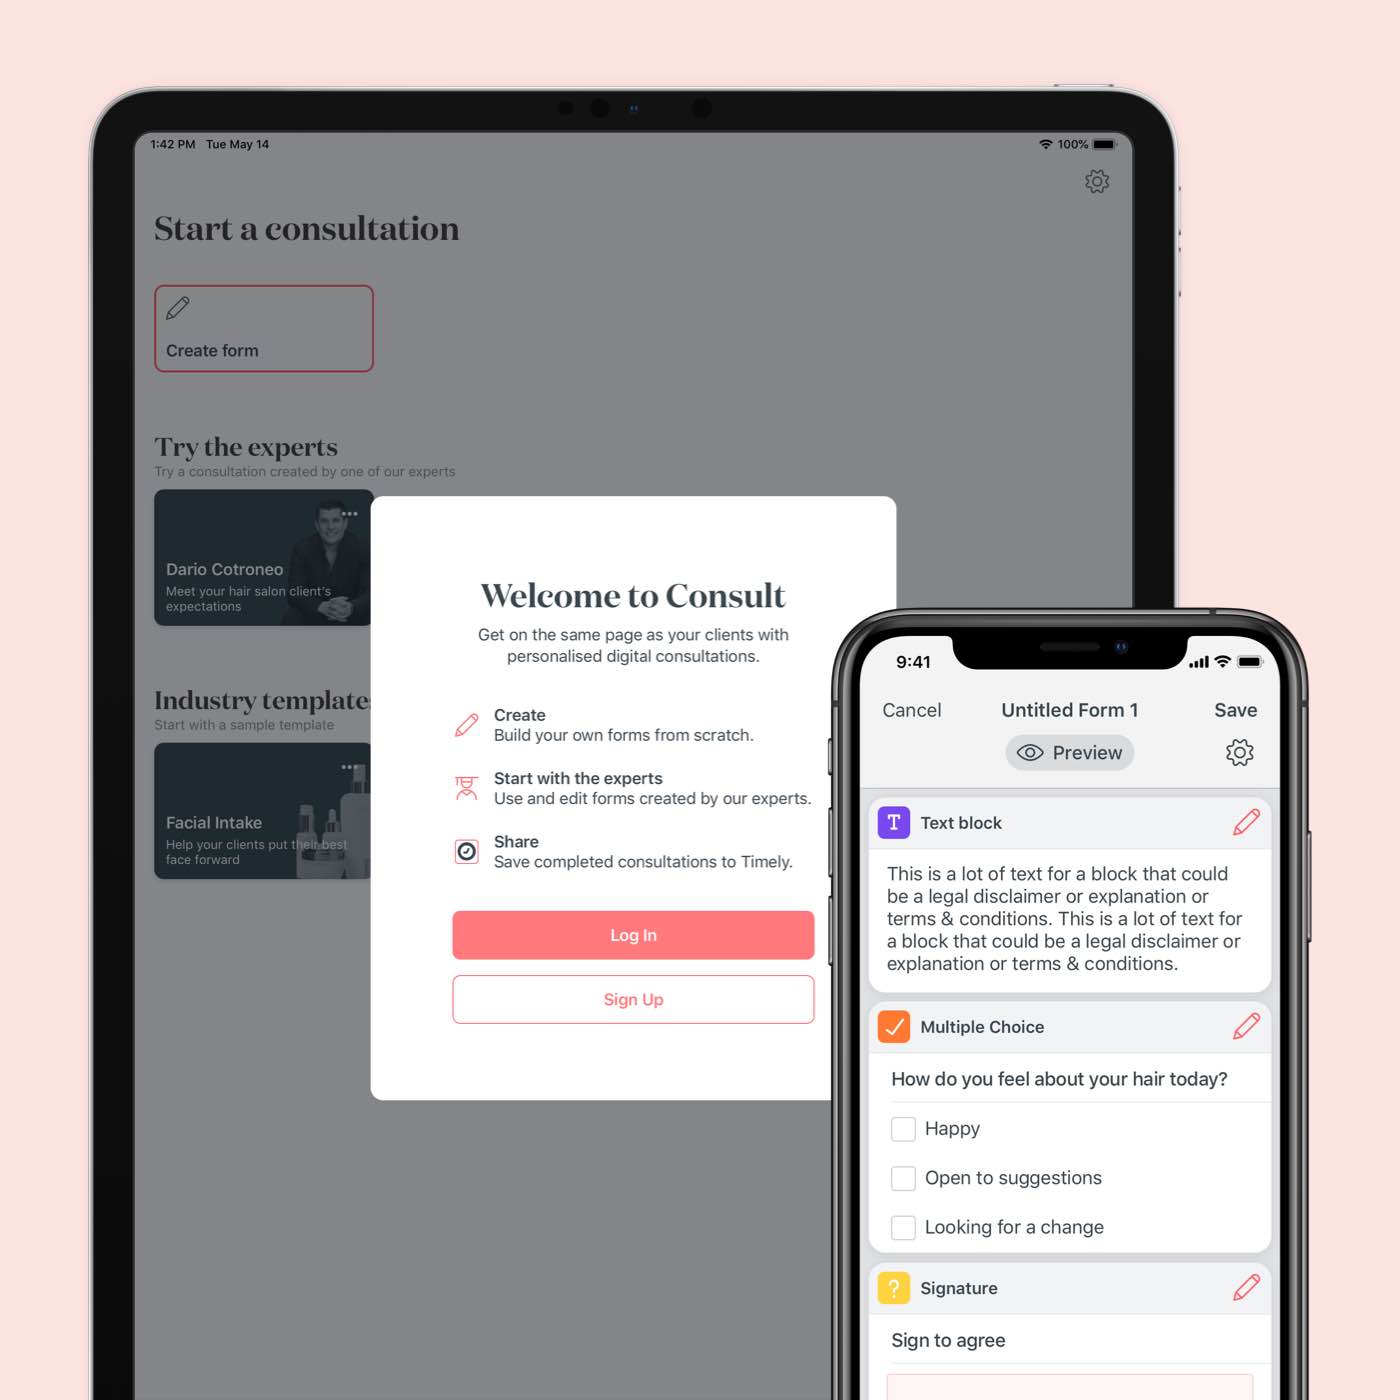 Consult works beautifully on any Apple device, iPad and iPhone